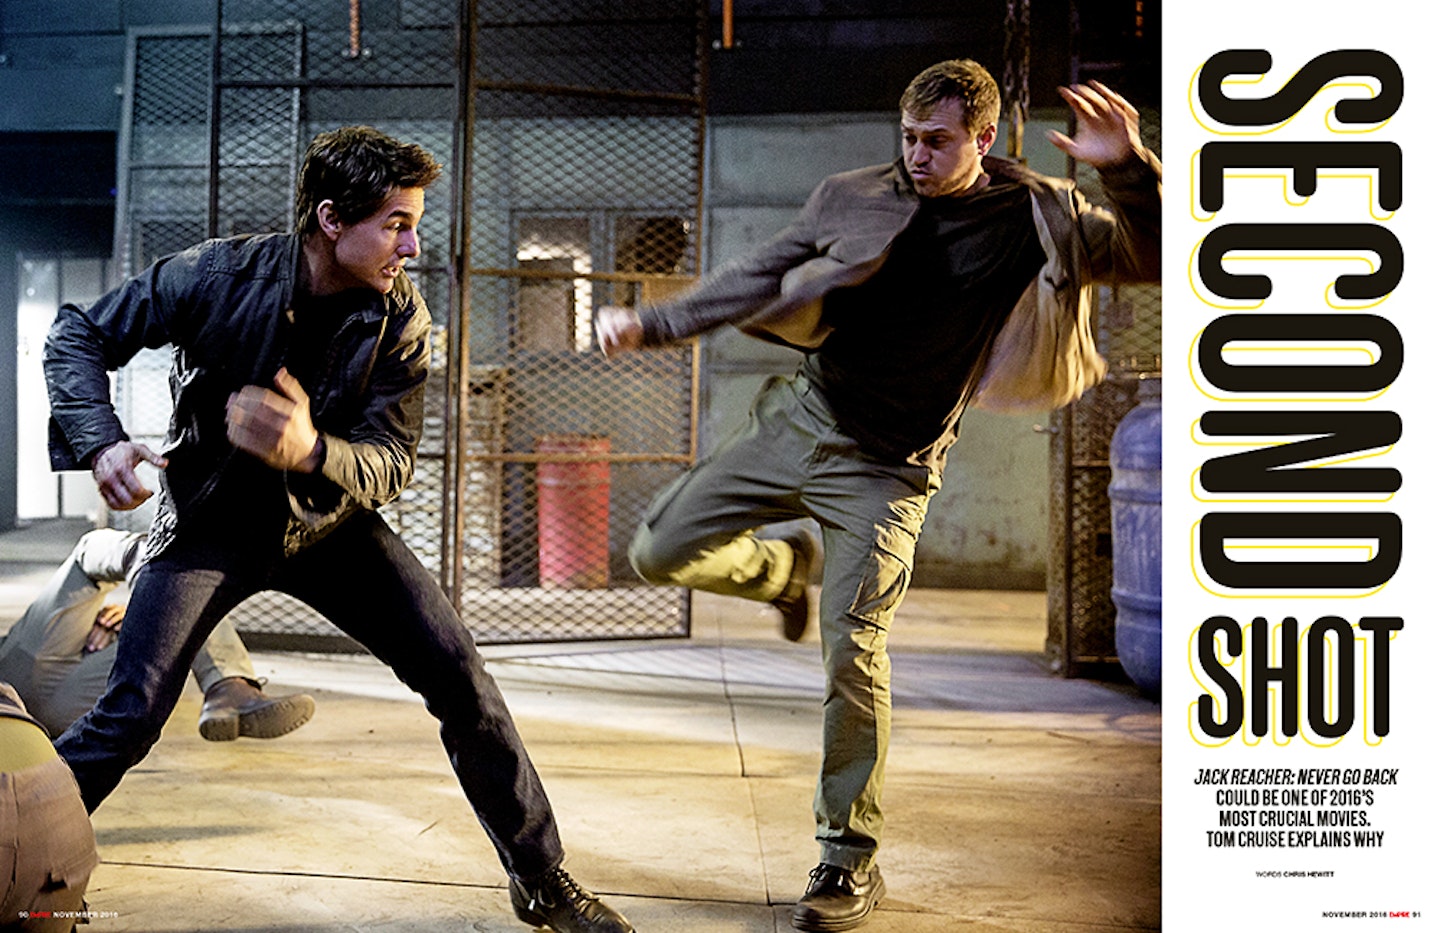 Tom Cruise stars in our Jack Reacher feature